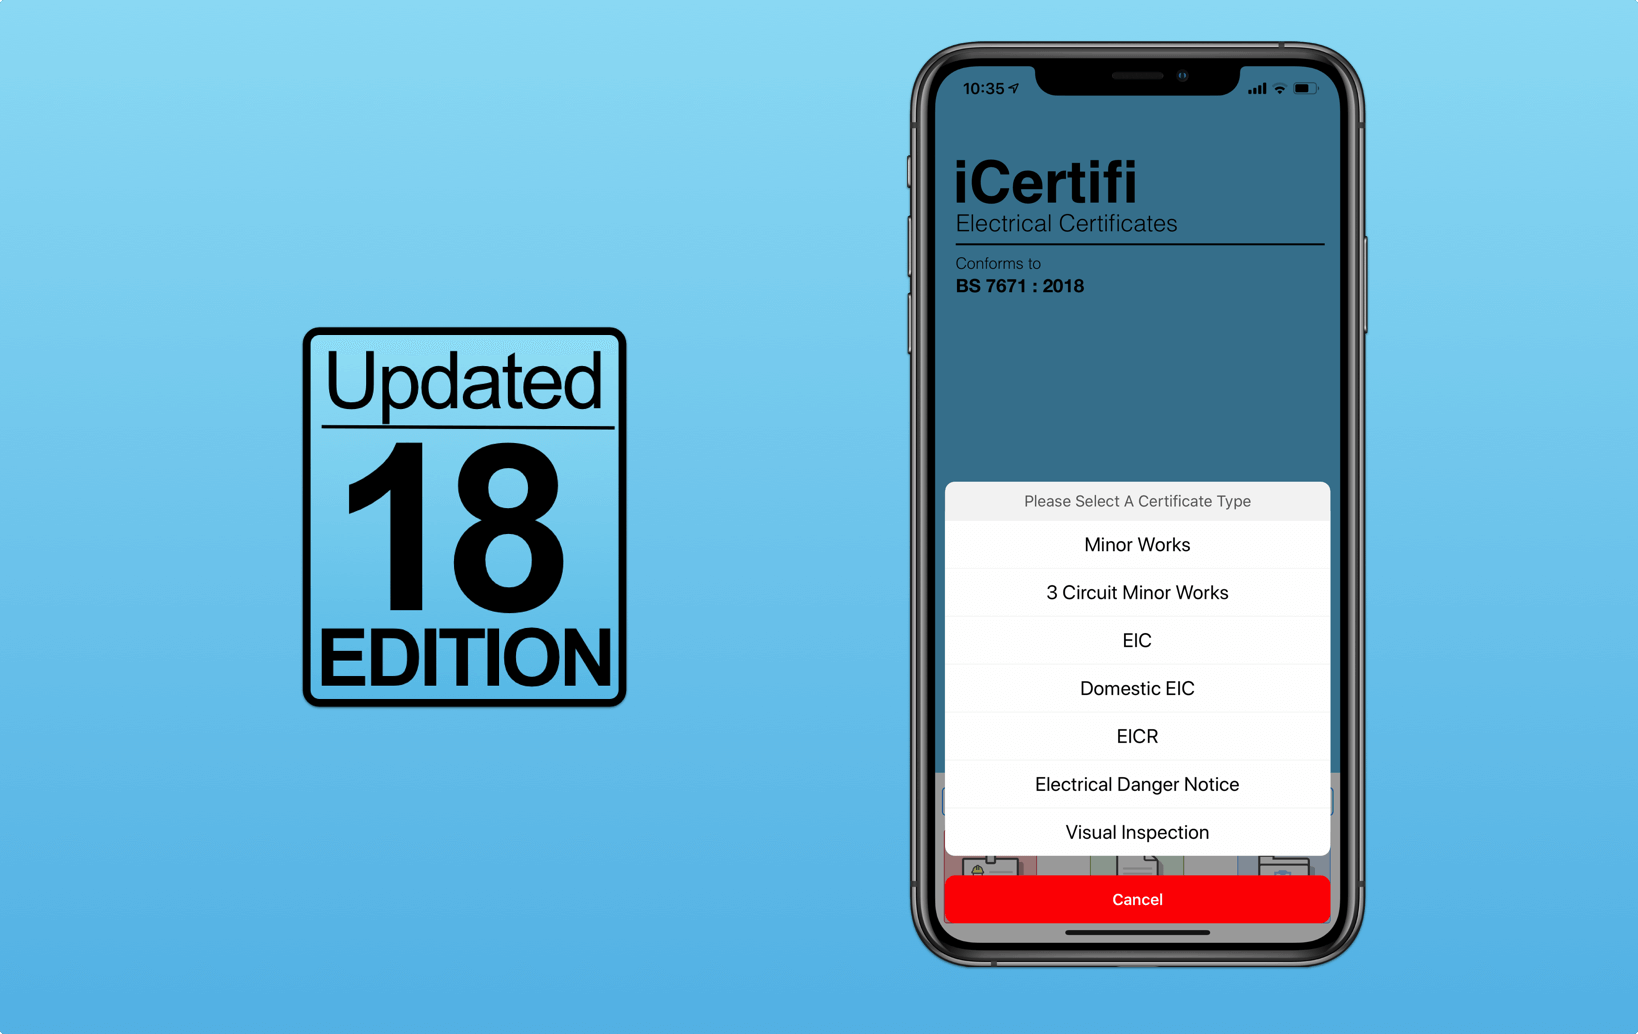 Get Ready for iCertifi 18th Edition